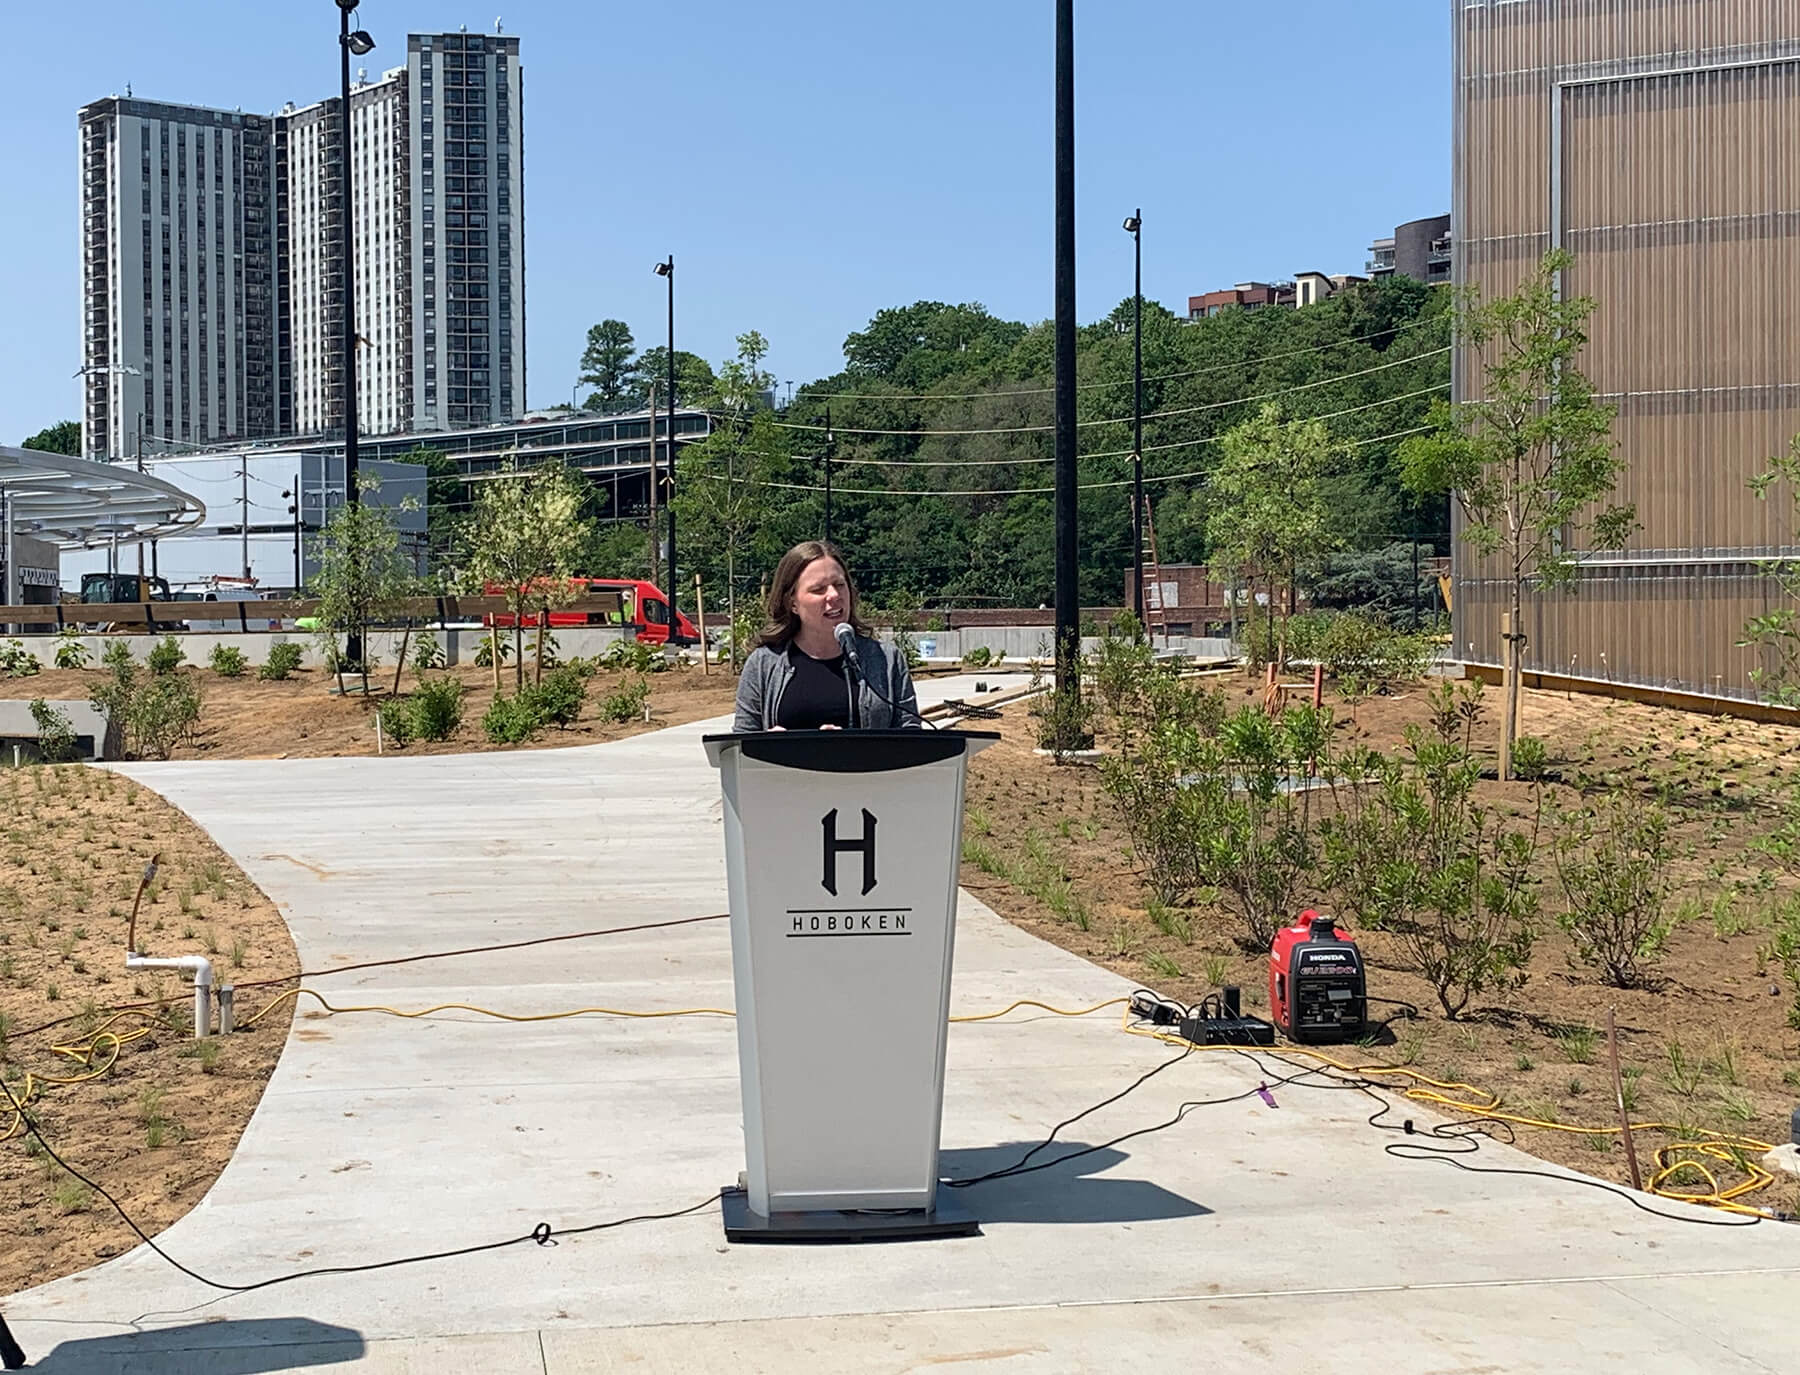 Jennifer Gonzalez stands in a newly planted green space at a podium emblazoned with a large letter H and the name Hoboken.